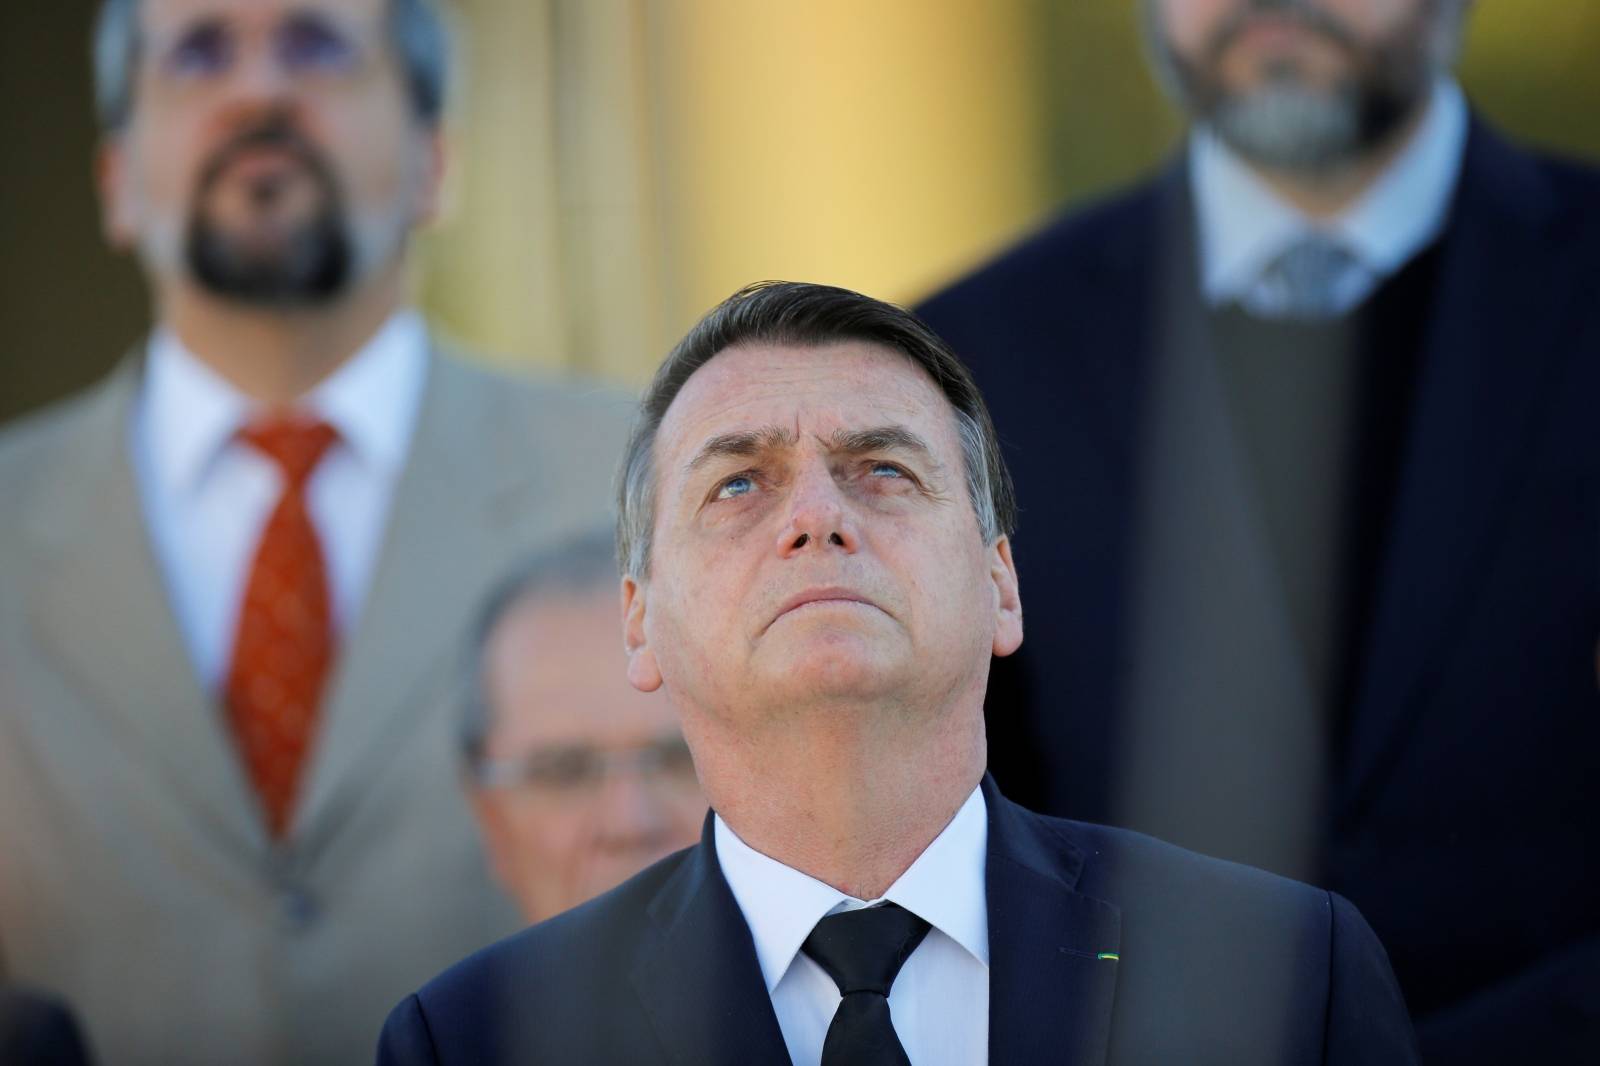 Brazil's President Bolsonaro attends a ceremony of hoisting the national flag in front the Planalto Palace in Brasilia